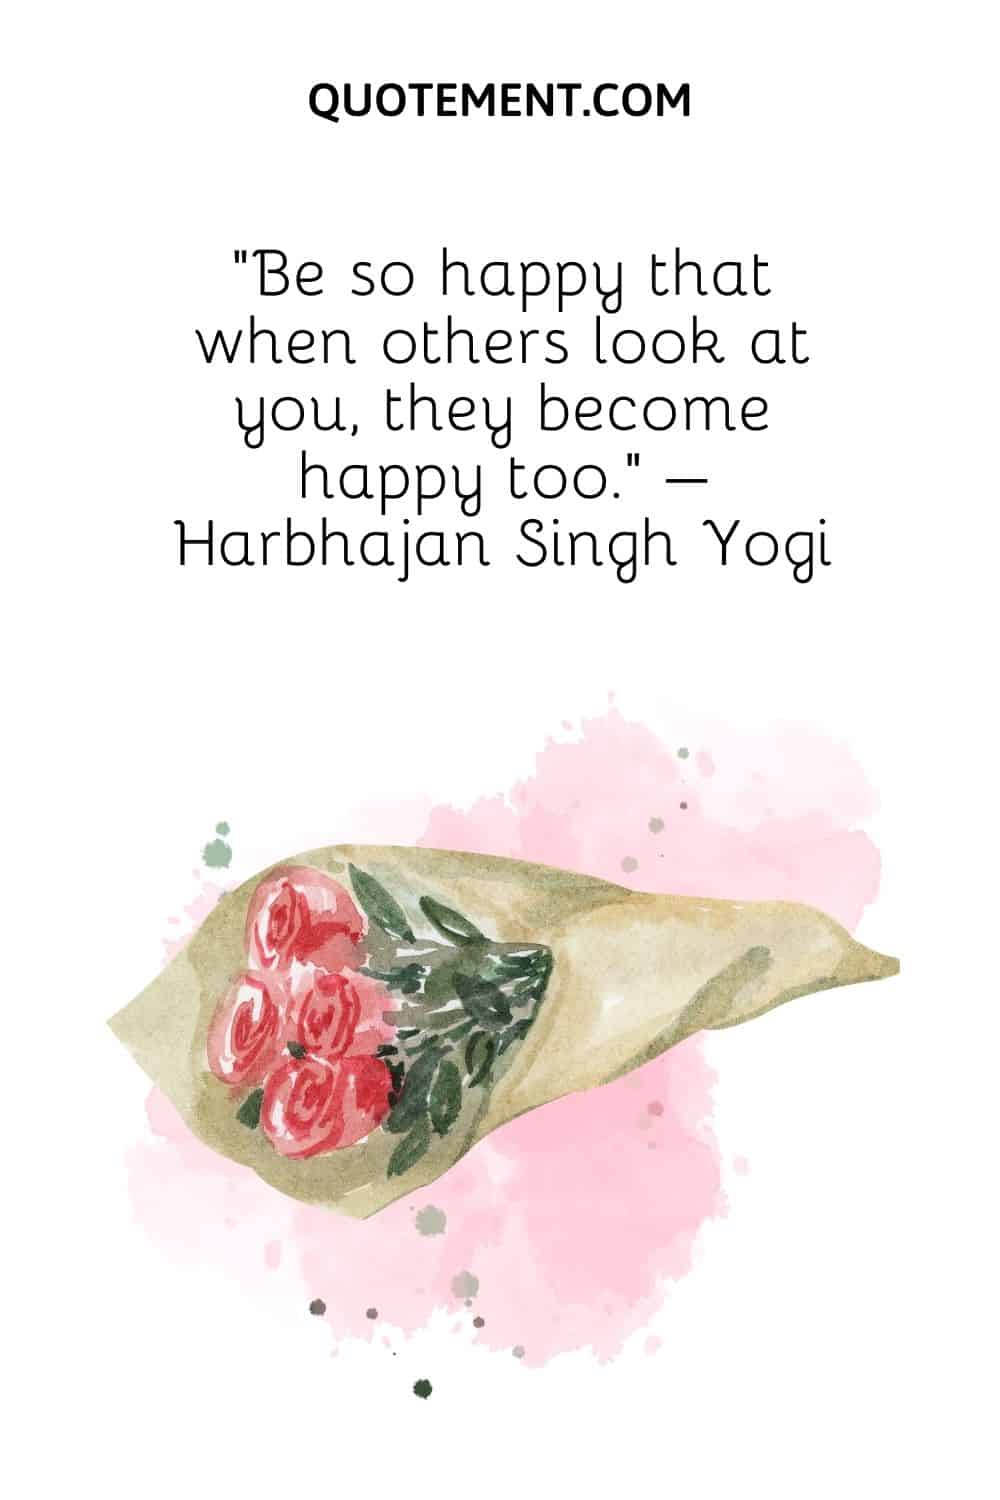 Be so happy that when others look at you, they become happy too. – Harbhajan Singh Yogi